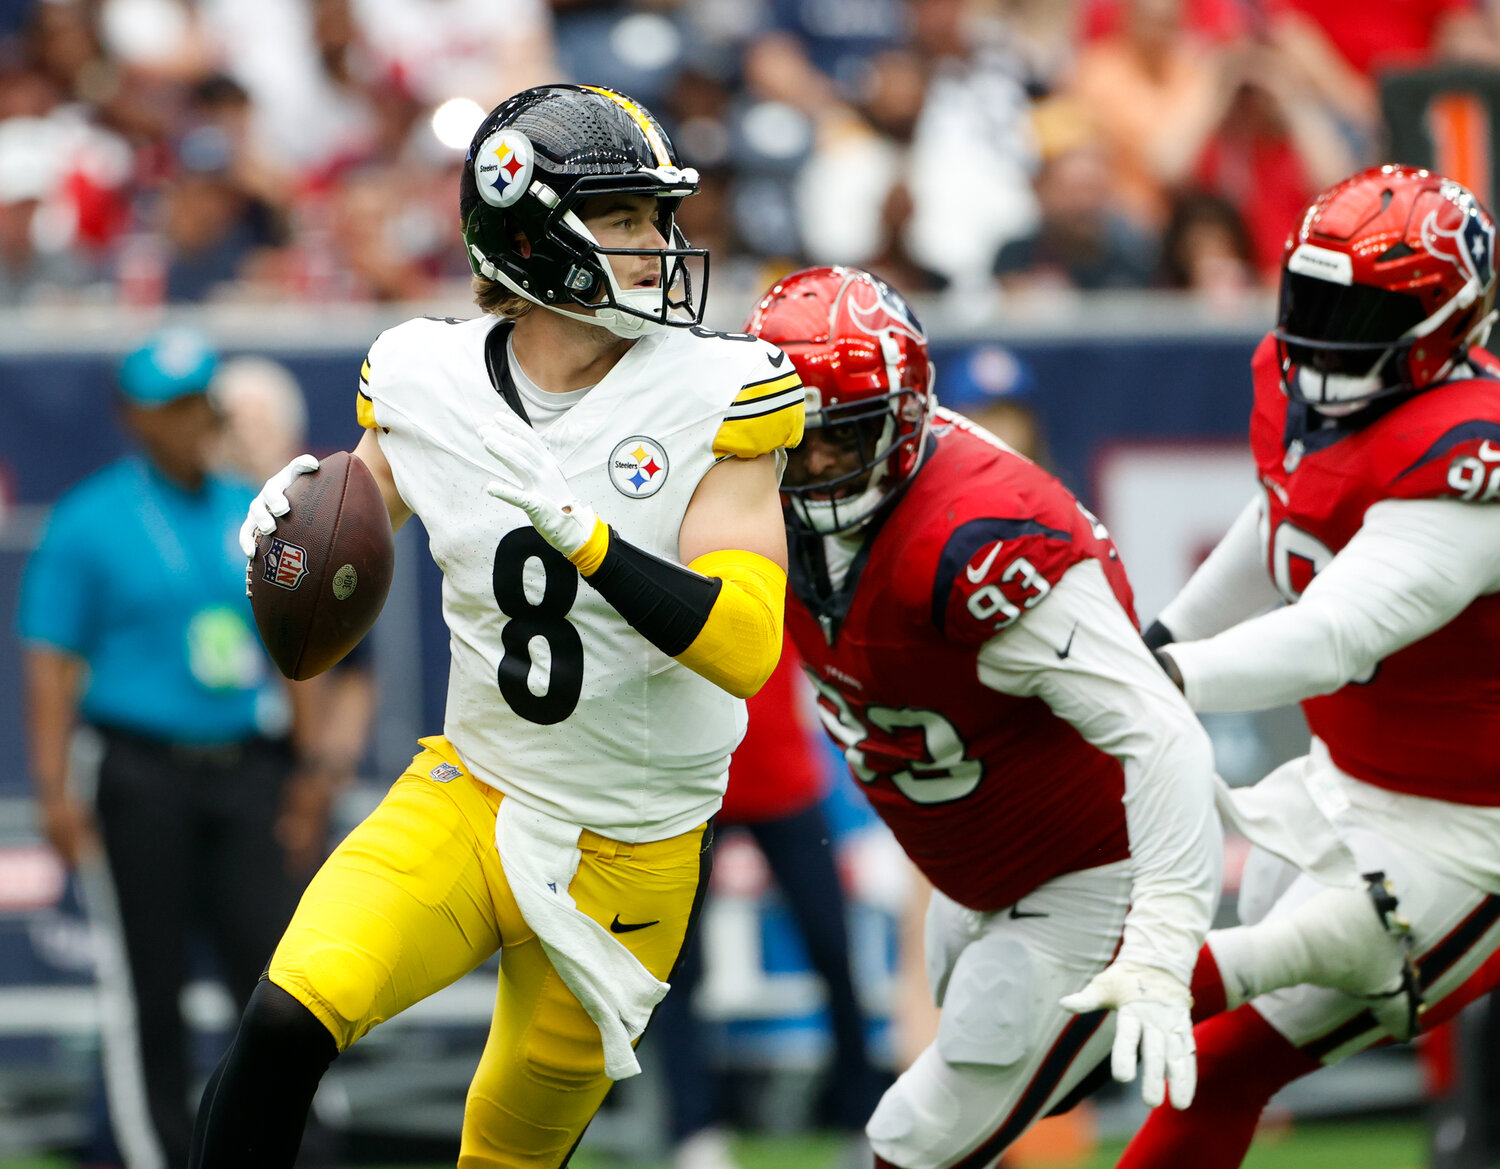 Texans defensive linemen Kurt Hinish (93) and Maliek Collins (96) pursue Steelers quarterback Kenny Pickett (8) in the backfield during an NFL game on October 1, 2023 in Houston.